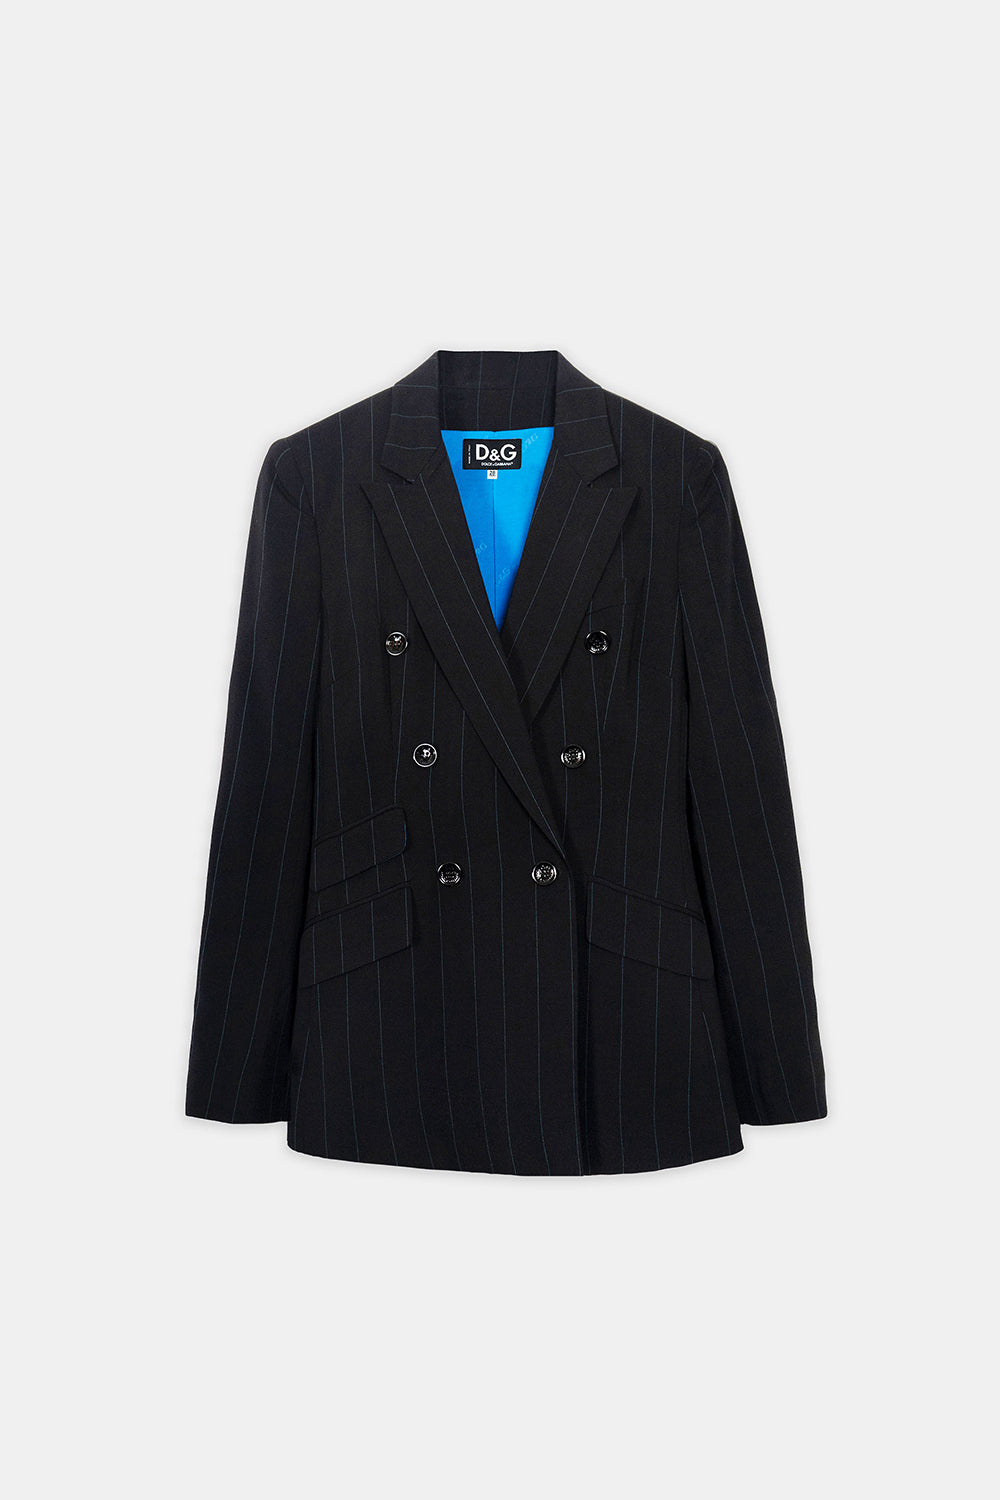 Dolce & Gabbana Pre-Owned Double Breasted Pinstripe Blazer